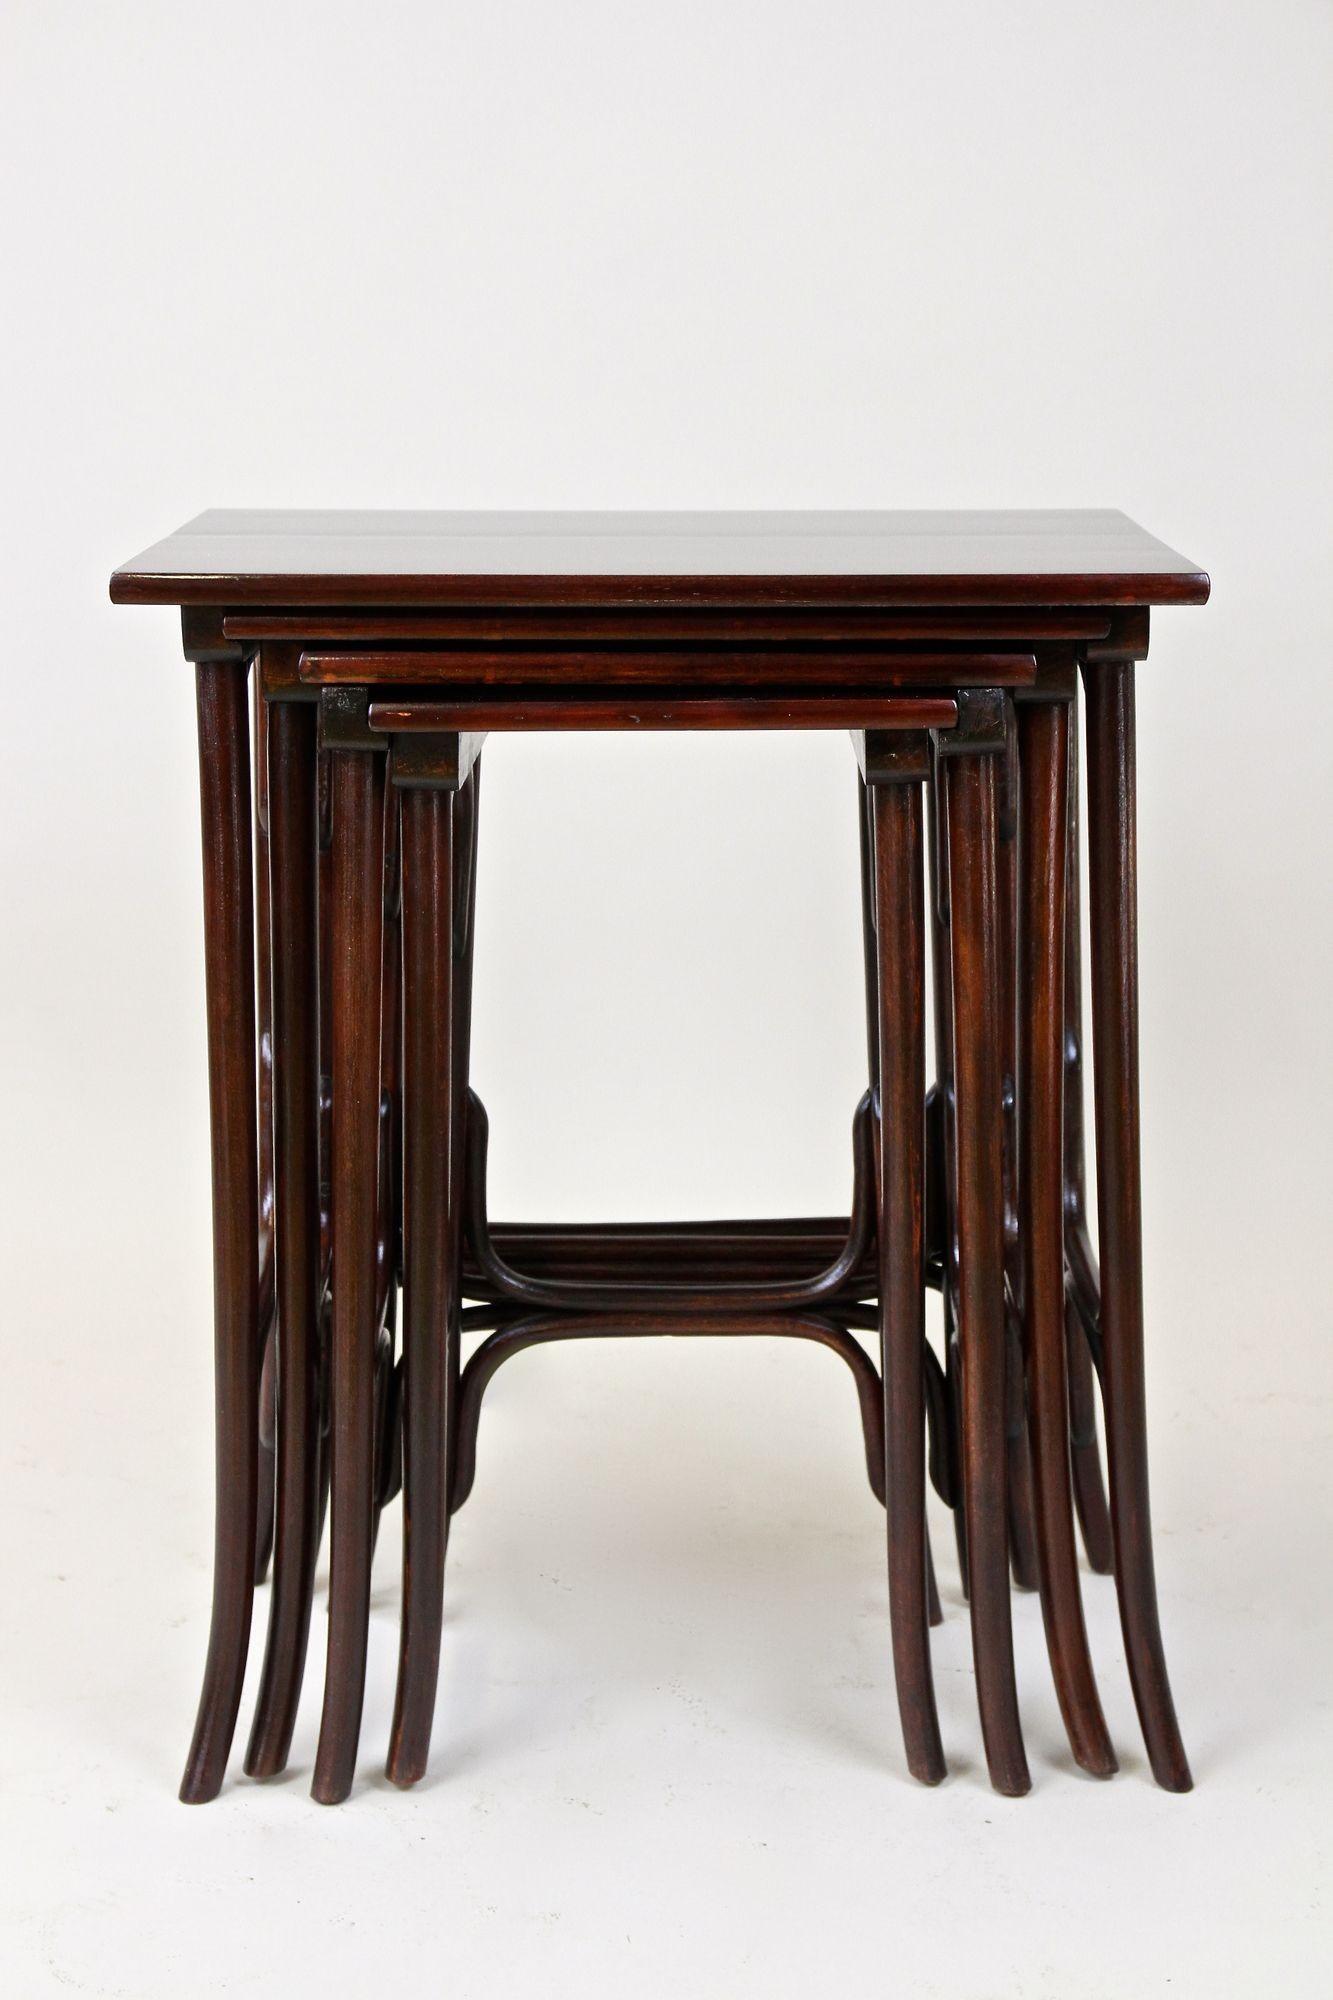 20th Century Art Nouveau Bentwood Nesting Tables by Thonet, Marked, Austria circa 1905 For Sale